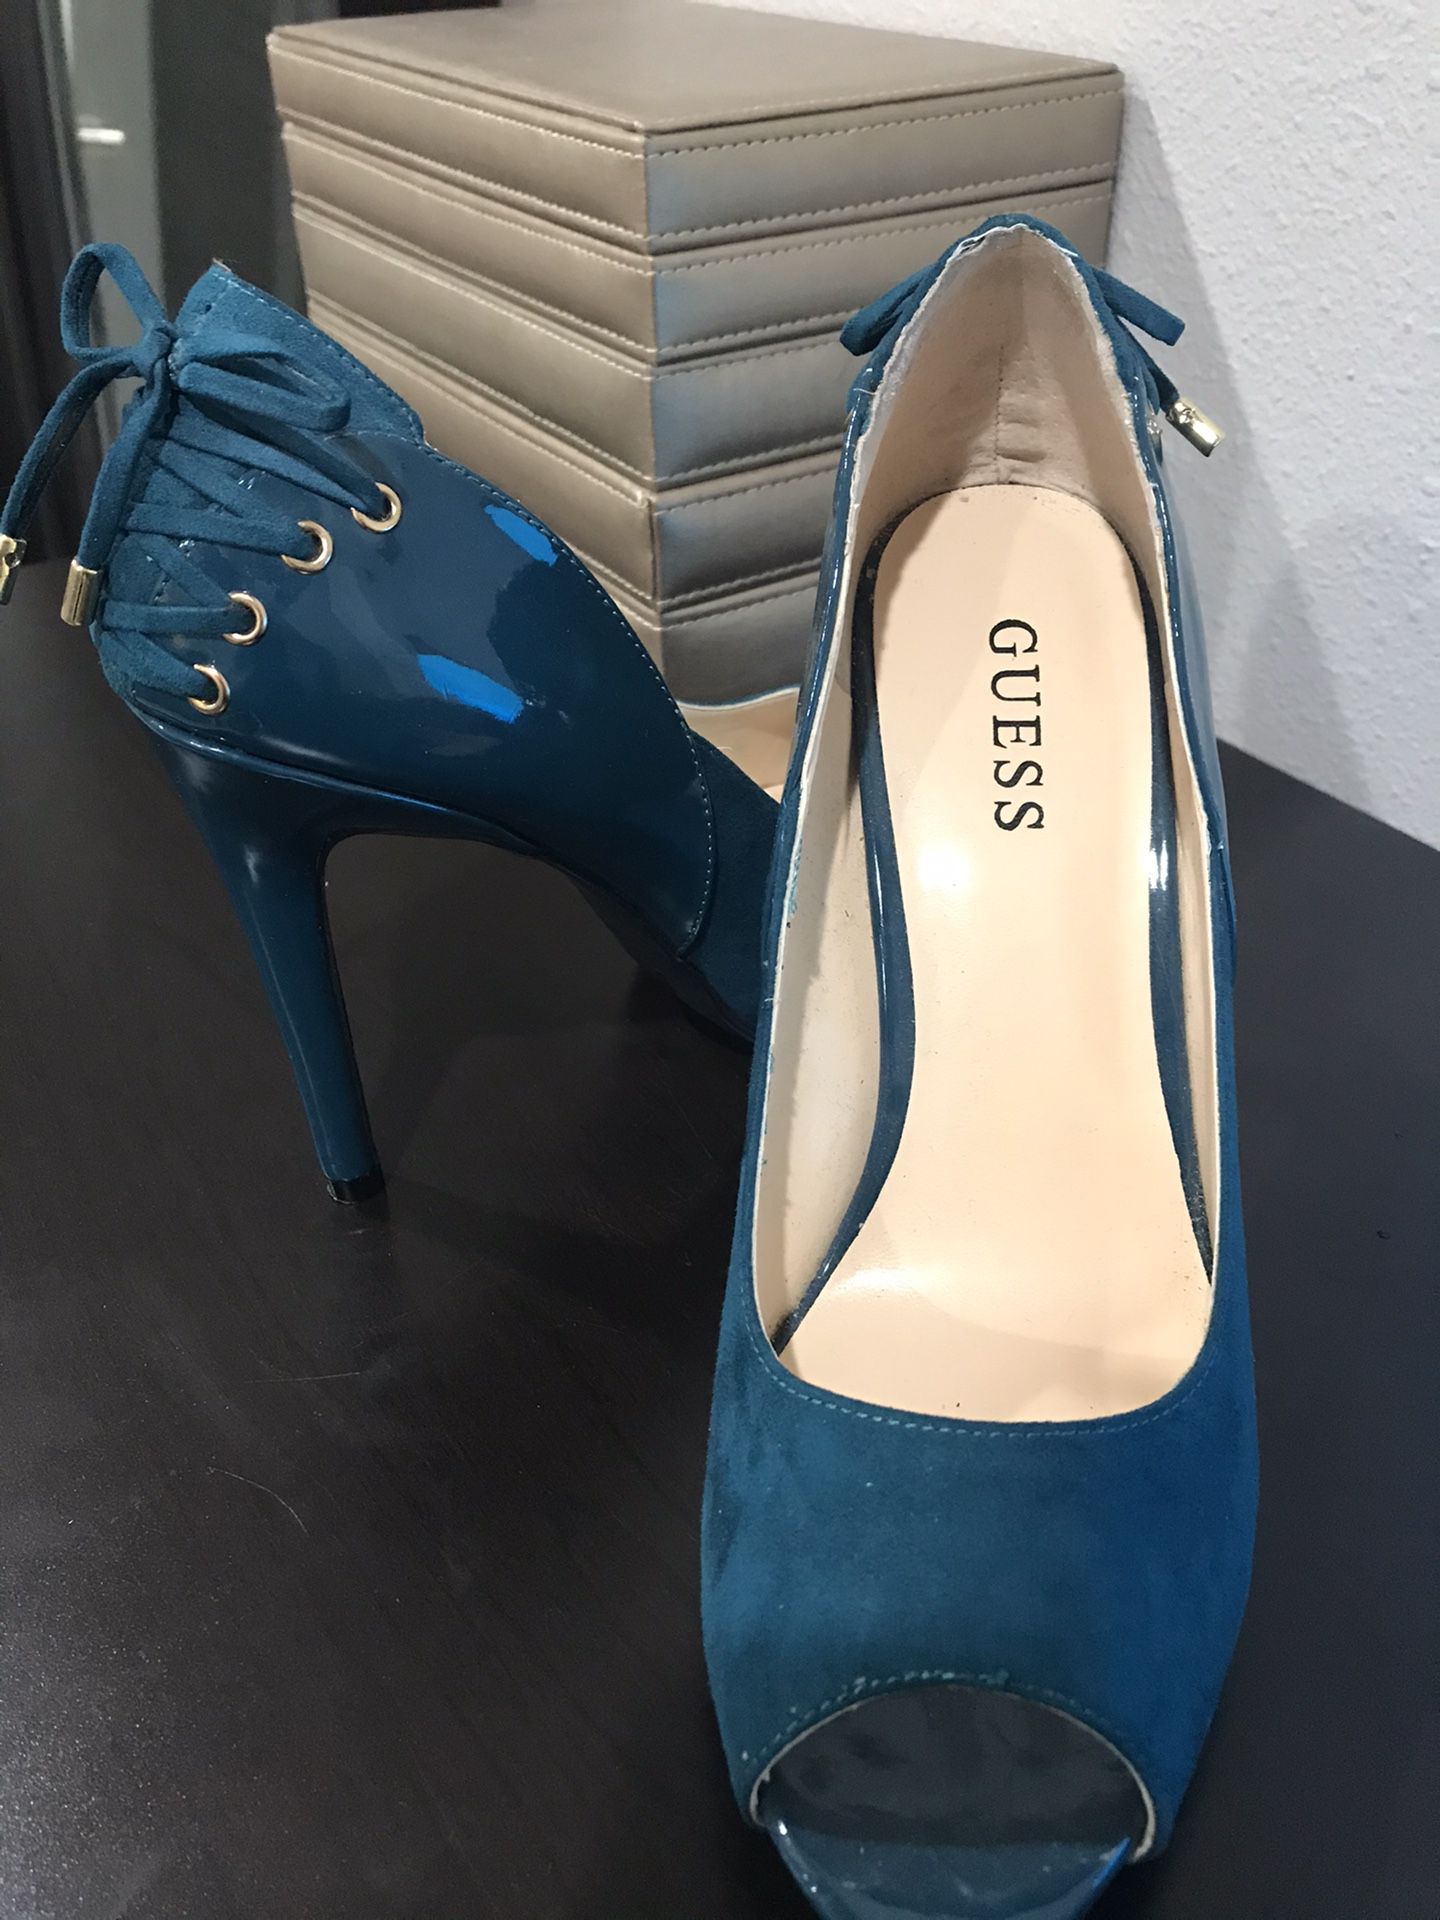 Teal Suede and Patent Leather Guess Heels - Size 9